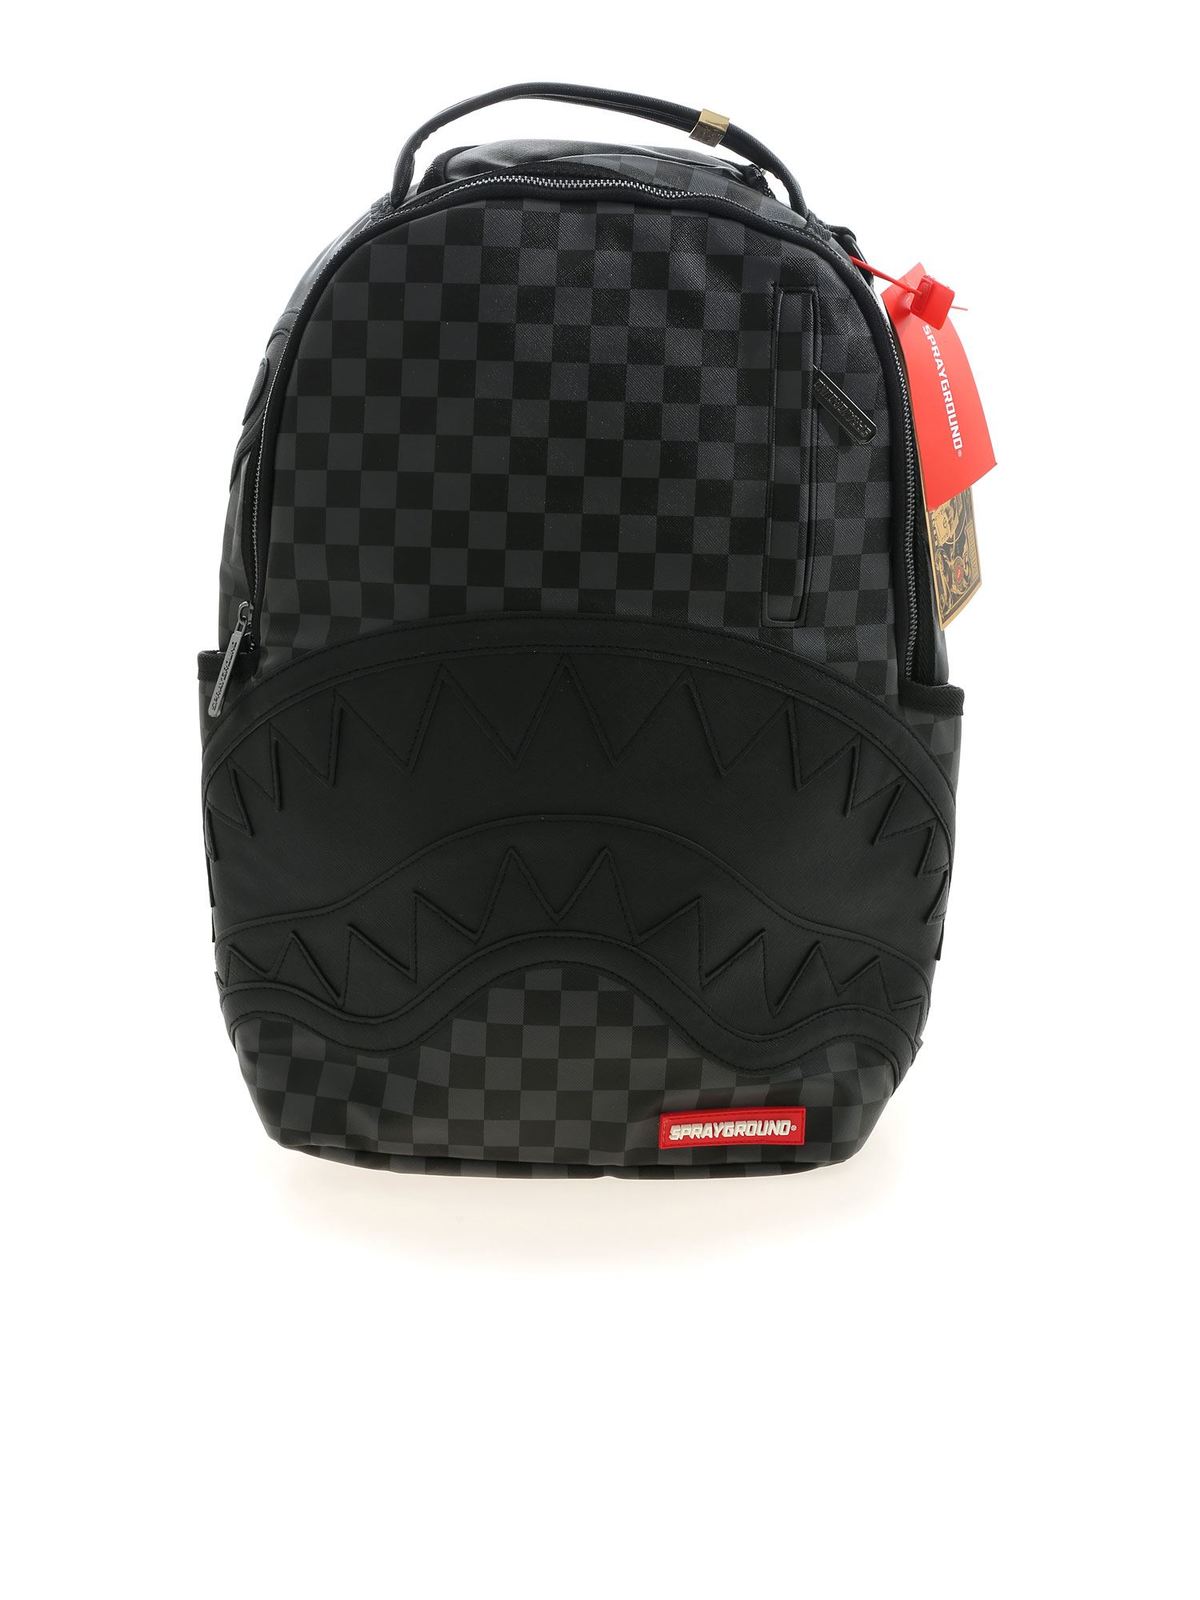 Backpacks Sprayground - Checked pattern backpack in black and grey